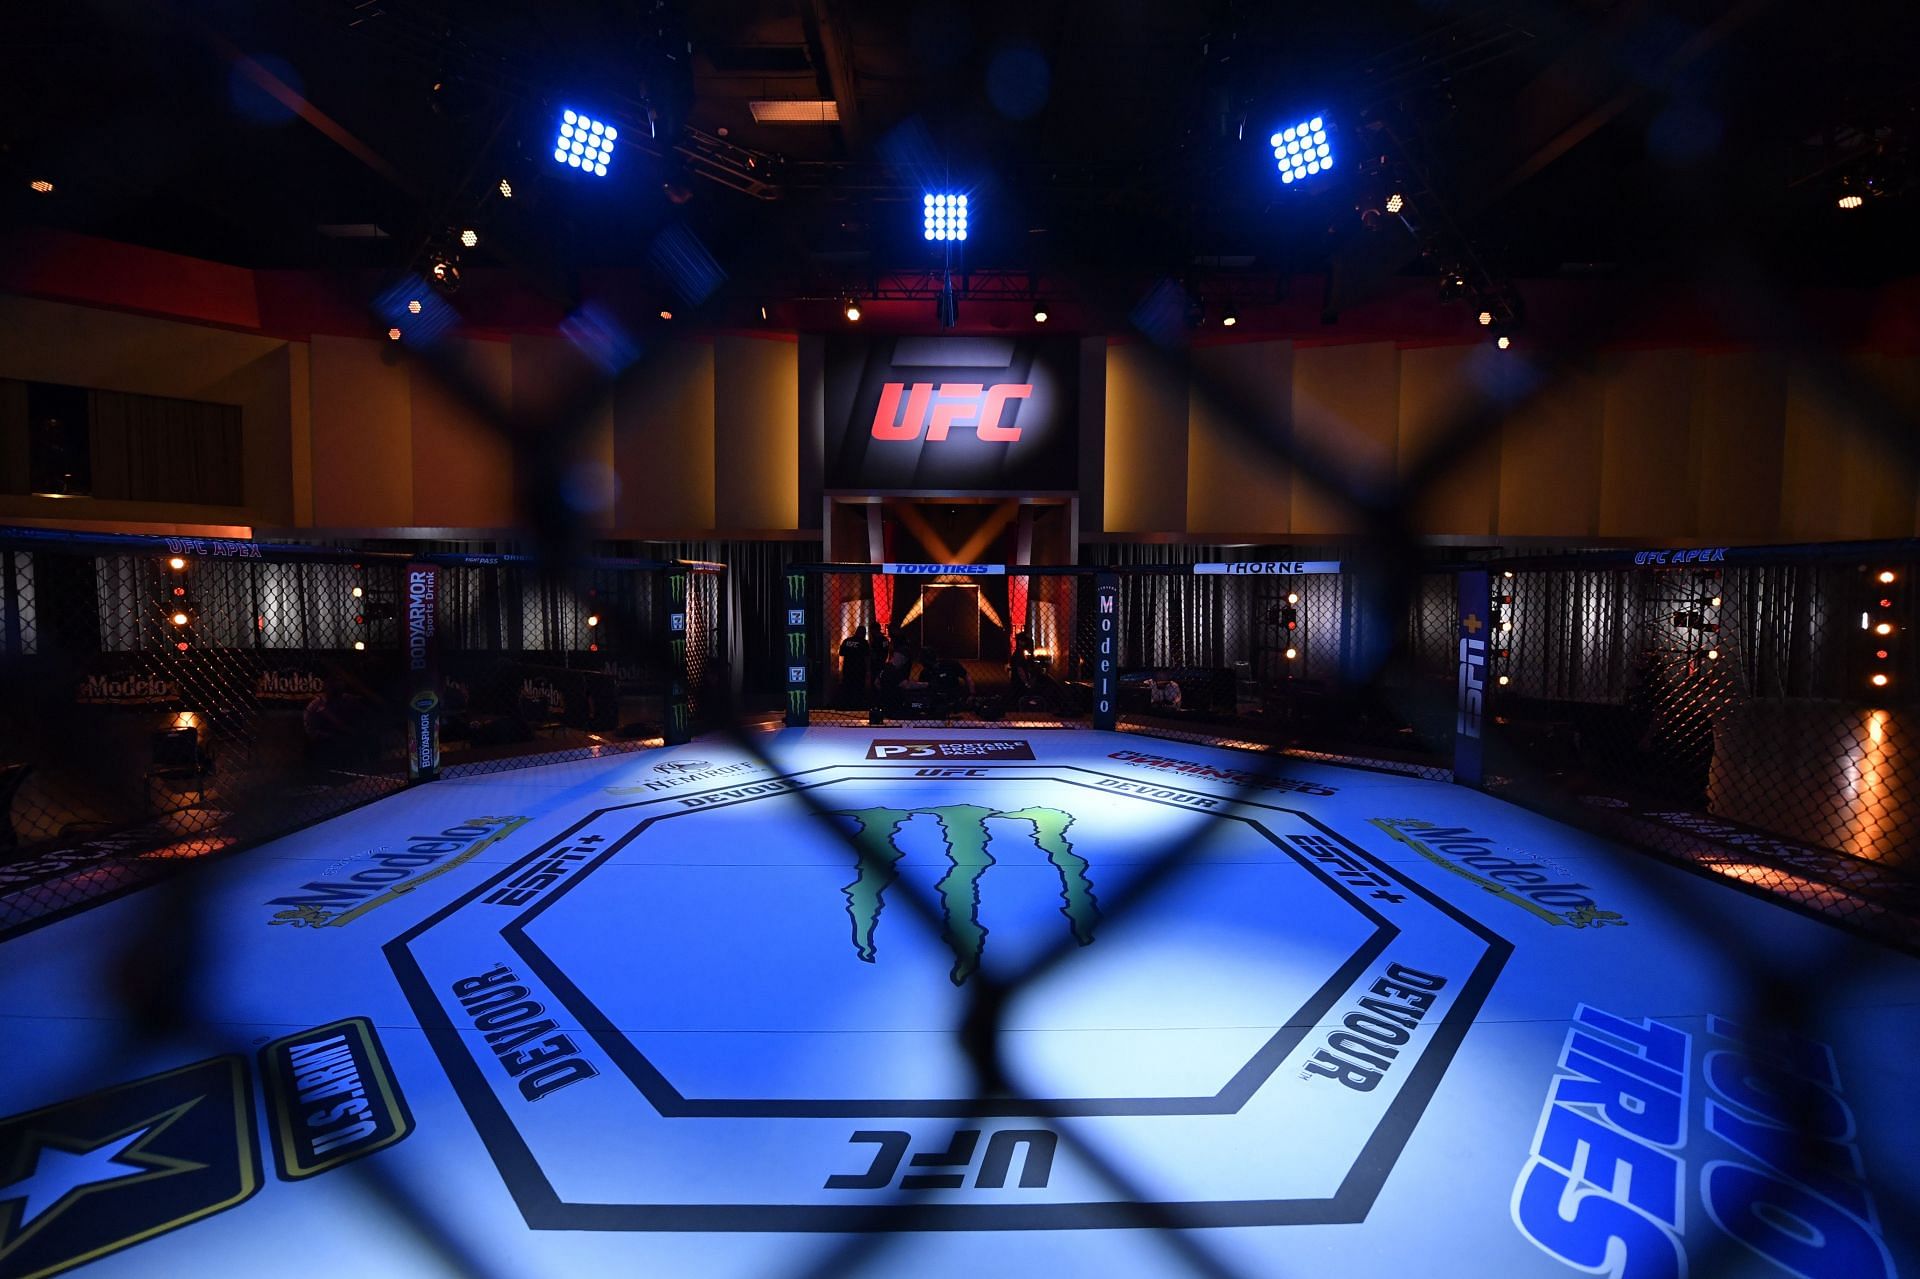 Which new faces could soon join the UFC?